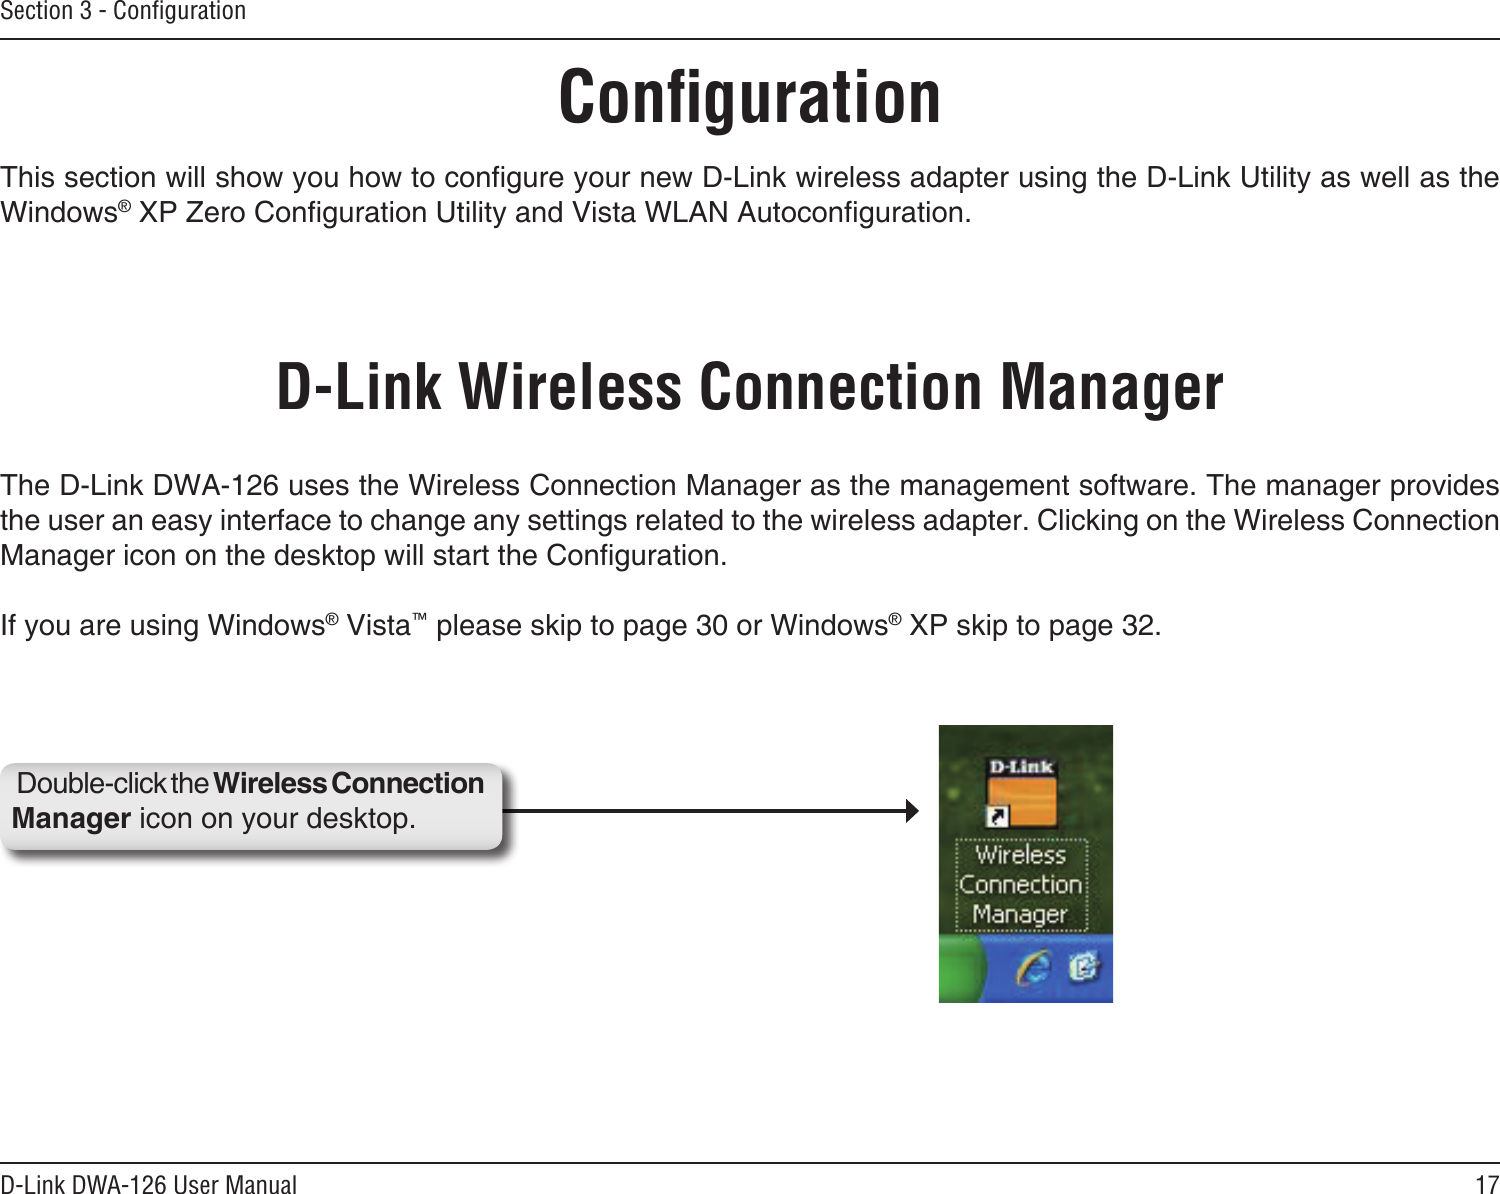 17D-Link DWA-126 User ManualSection 3 - ConﬁgurationConﬁgurationThis section will show you how to congure your new D-Link wireless adapter using the D-Link Utility as well as the Windows® XP Zero Conguration Utility and Vista WLAN Autoconguration.D-Link Wireless Connection ManagerThe D-Link DWA-126 uses the Wireless Connection Manager as the management software. The manager provides the user an easy interface to change any settings related to the wireless adapter. Clicking on the Wireless Connection Manager icon on the desktop will start the Conguration.If you are using Windows® Vista™ please skip to page 30 or Windows® XP skip to page 32.Double-click the Wireless Connection Manager icon on your desktop.